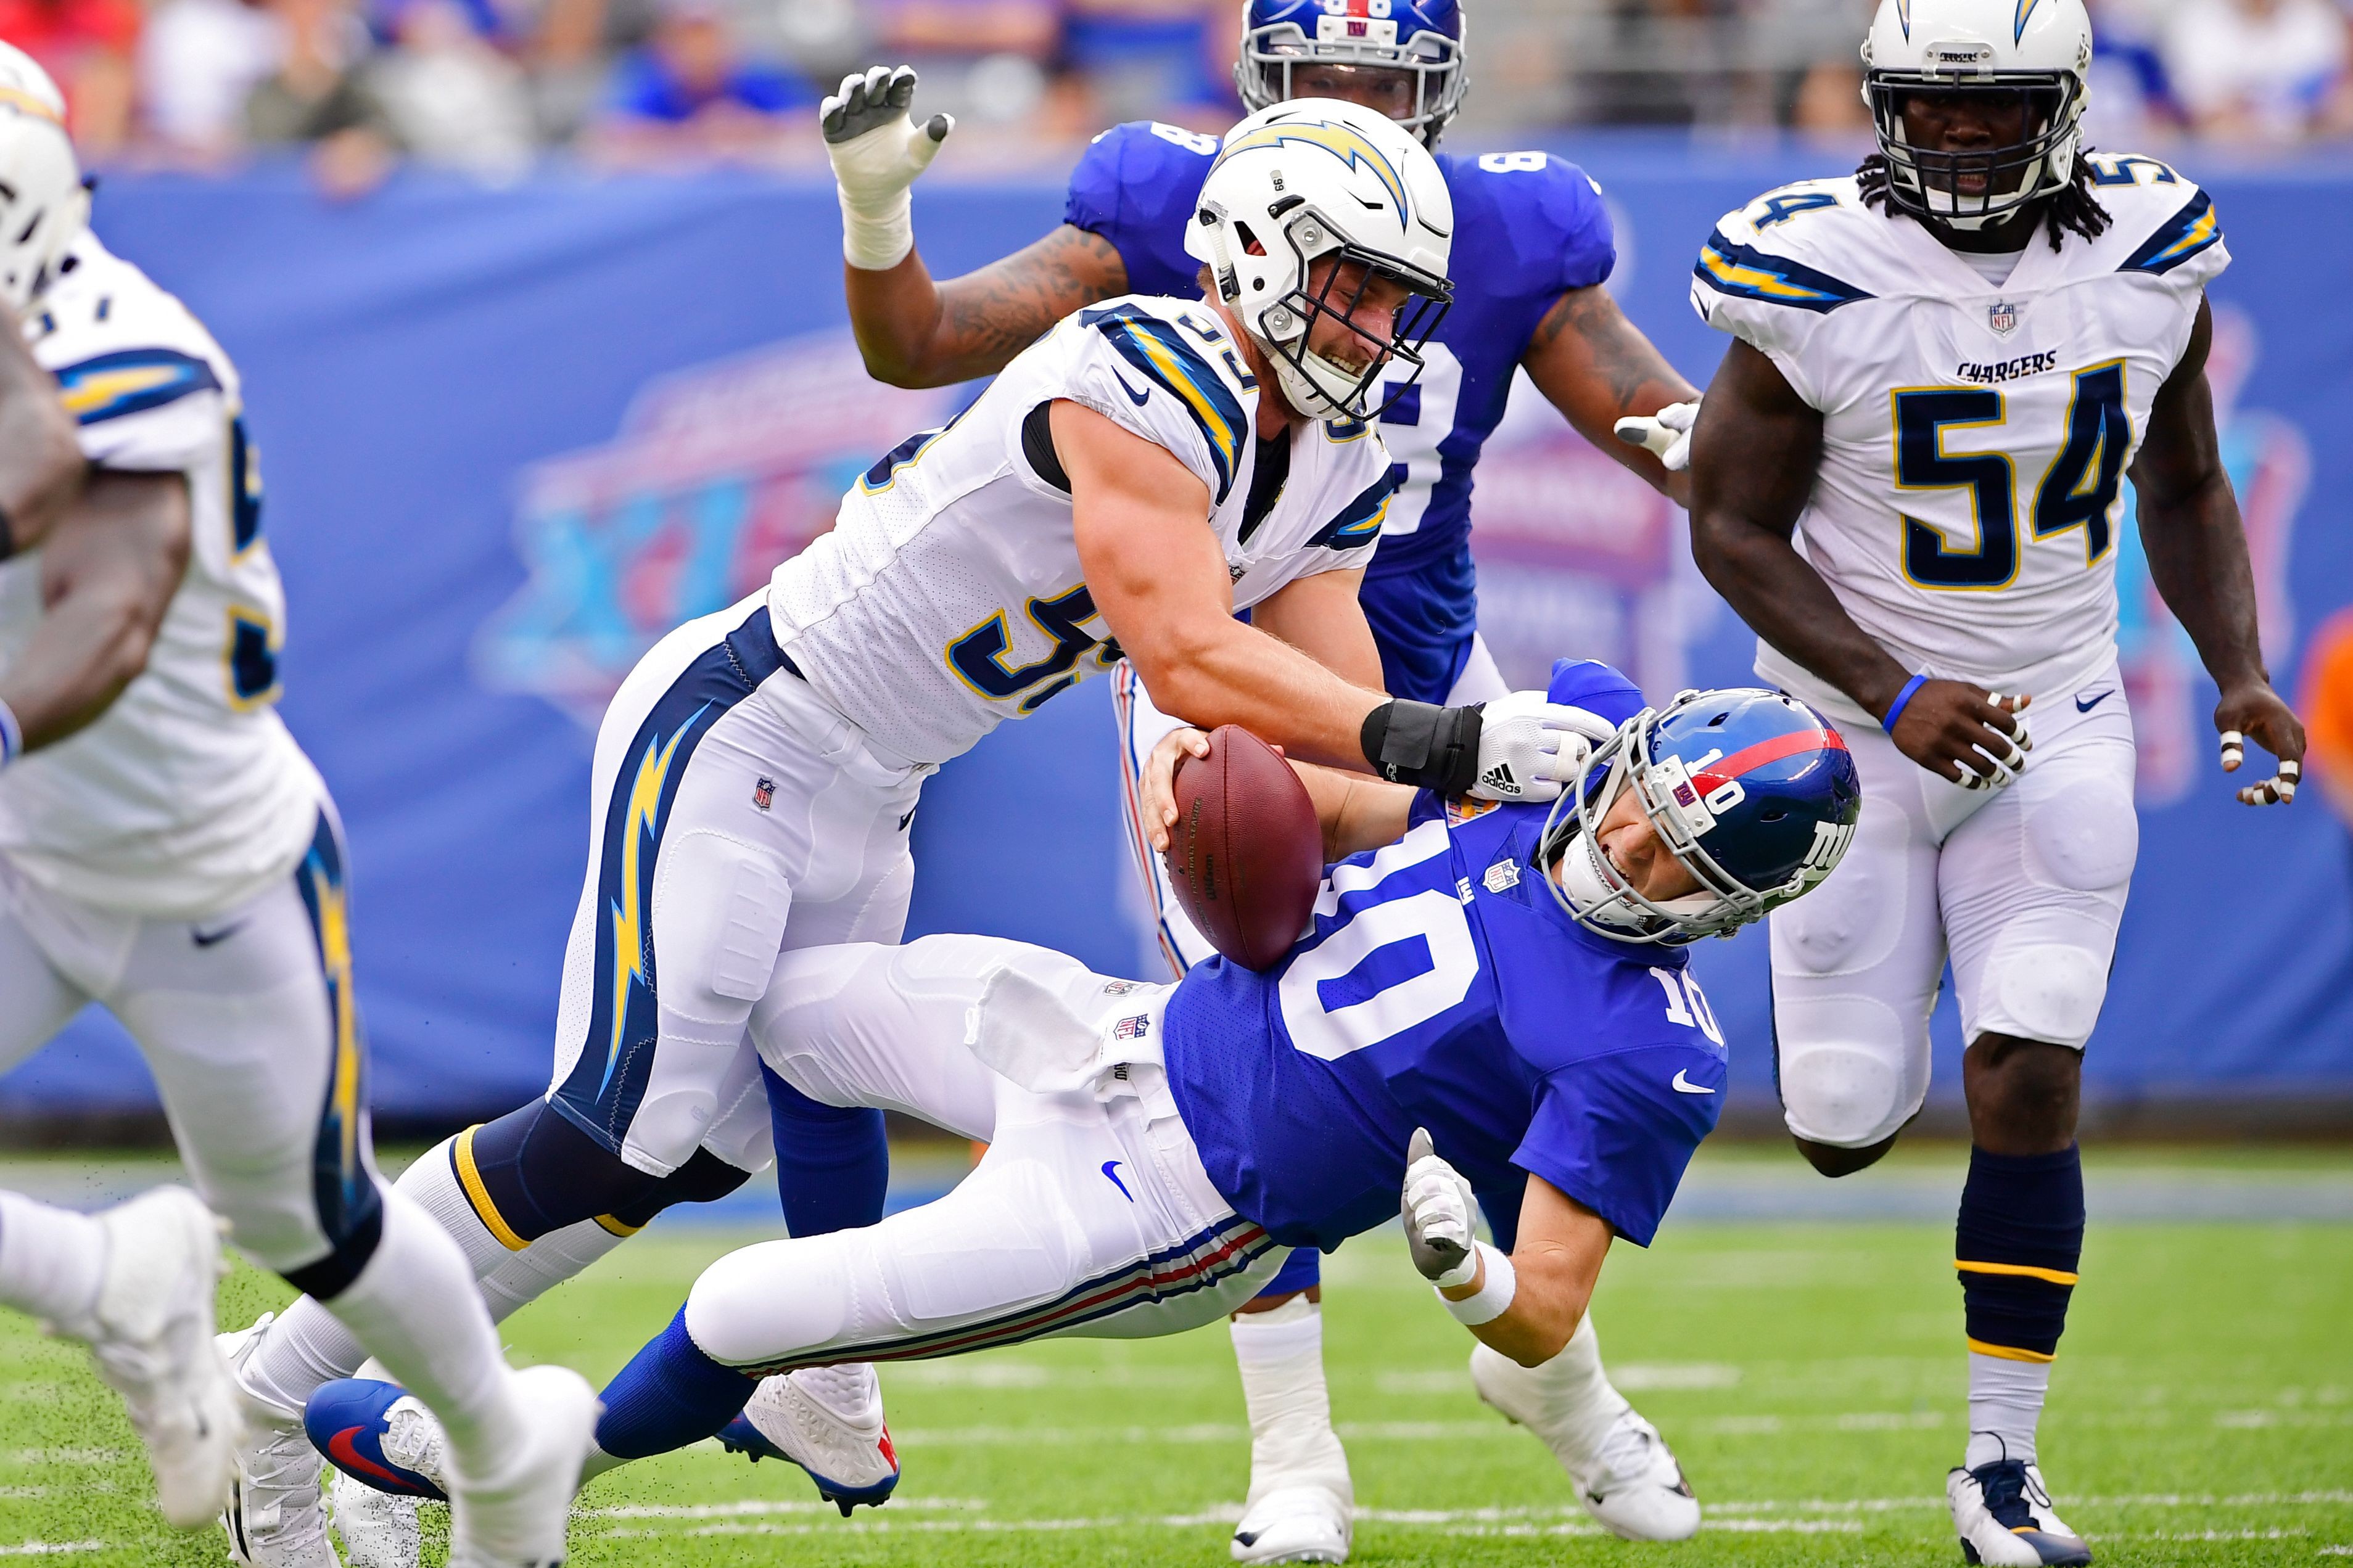 Grading the Chargers’ defense going into the 2018 season